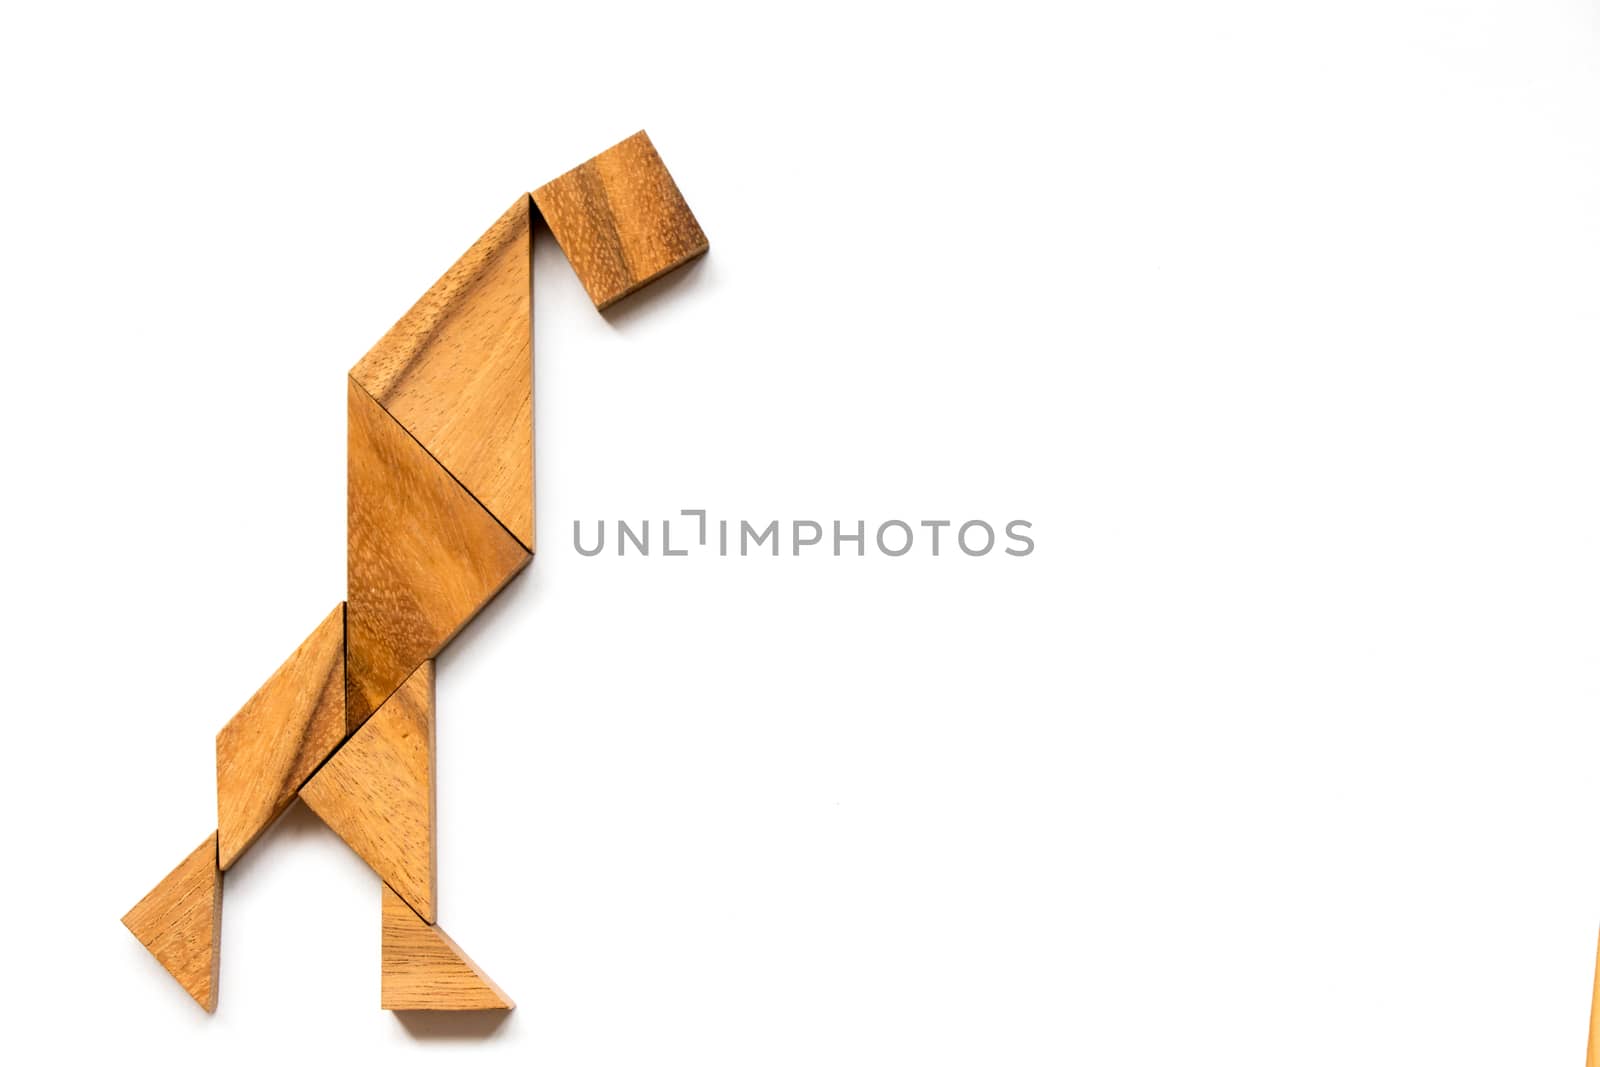 Wooden tangram as anxiety man shape on white background (Concept by Hengpattanapong